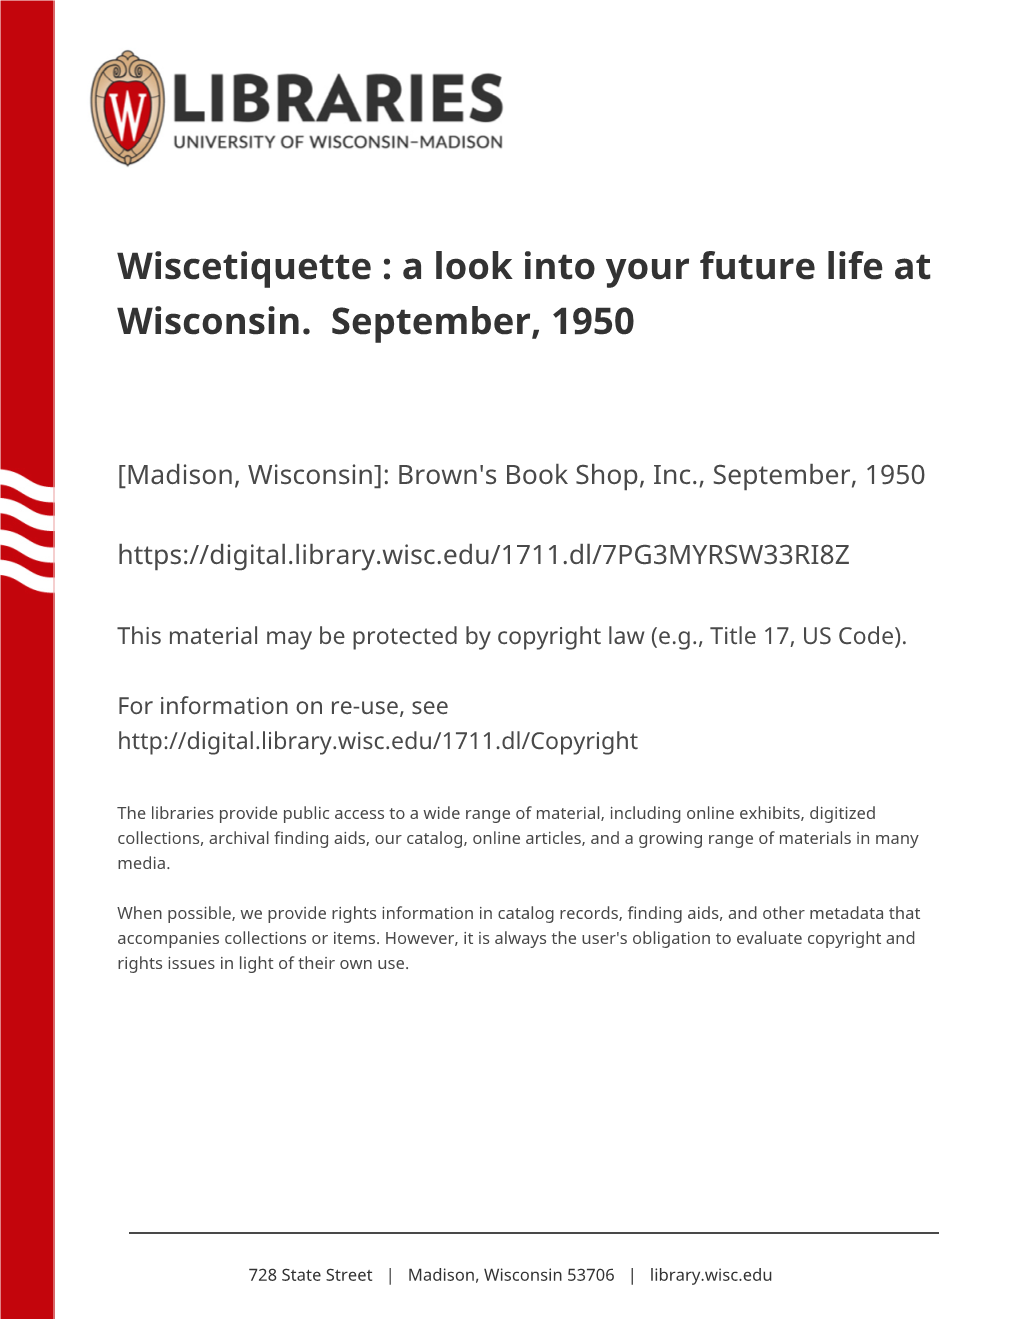 Wiscetiquette : a Look Into Your Future Life at Wisconsin